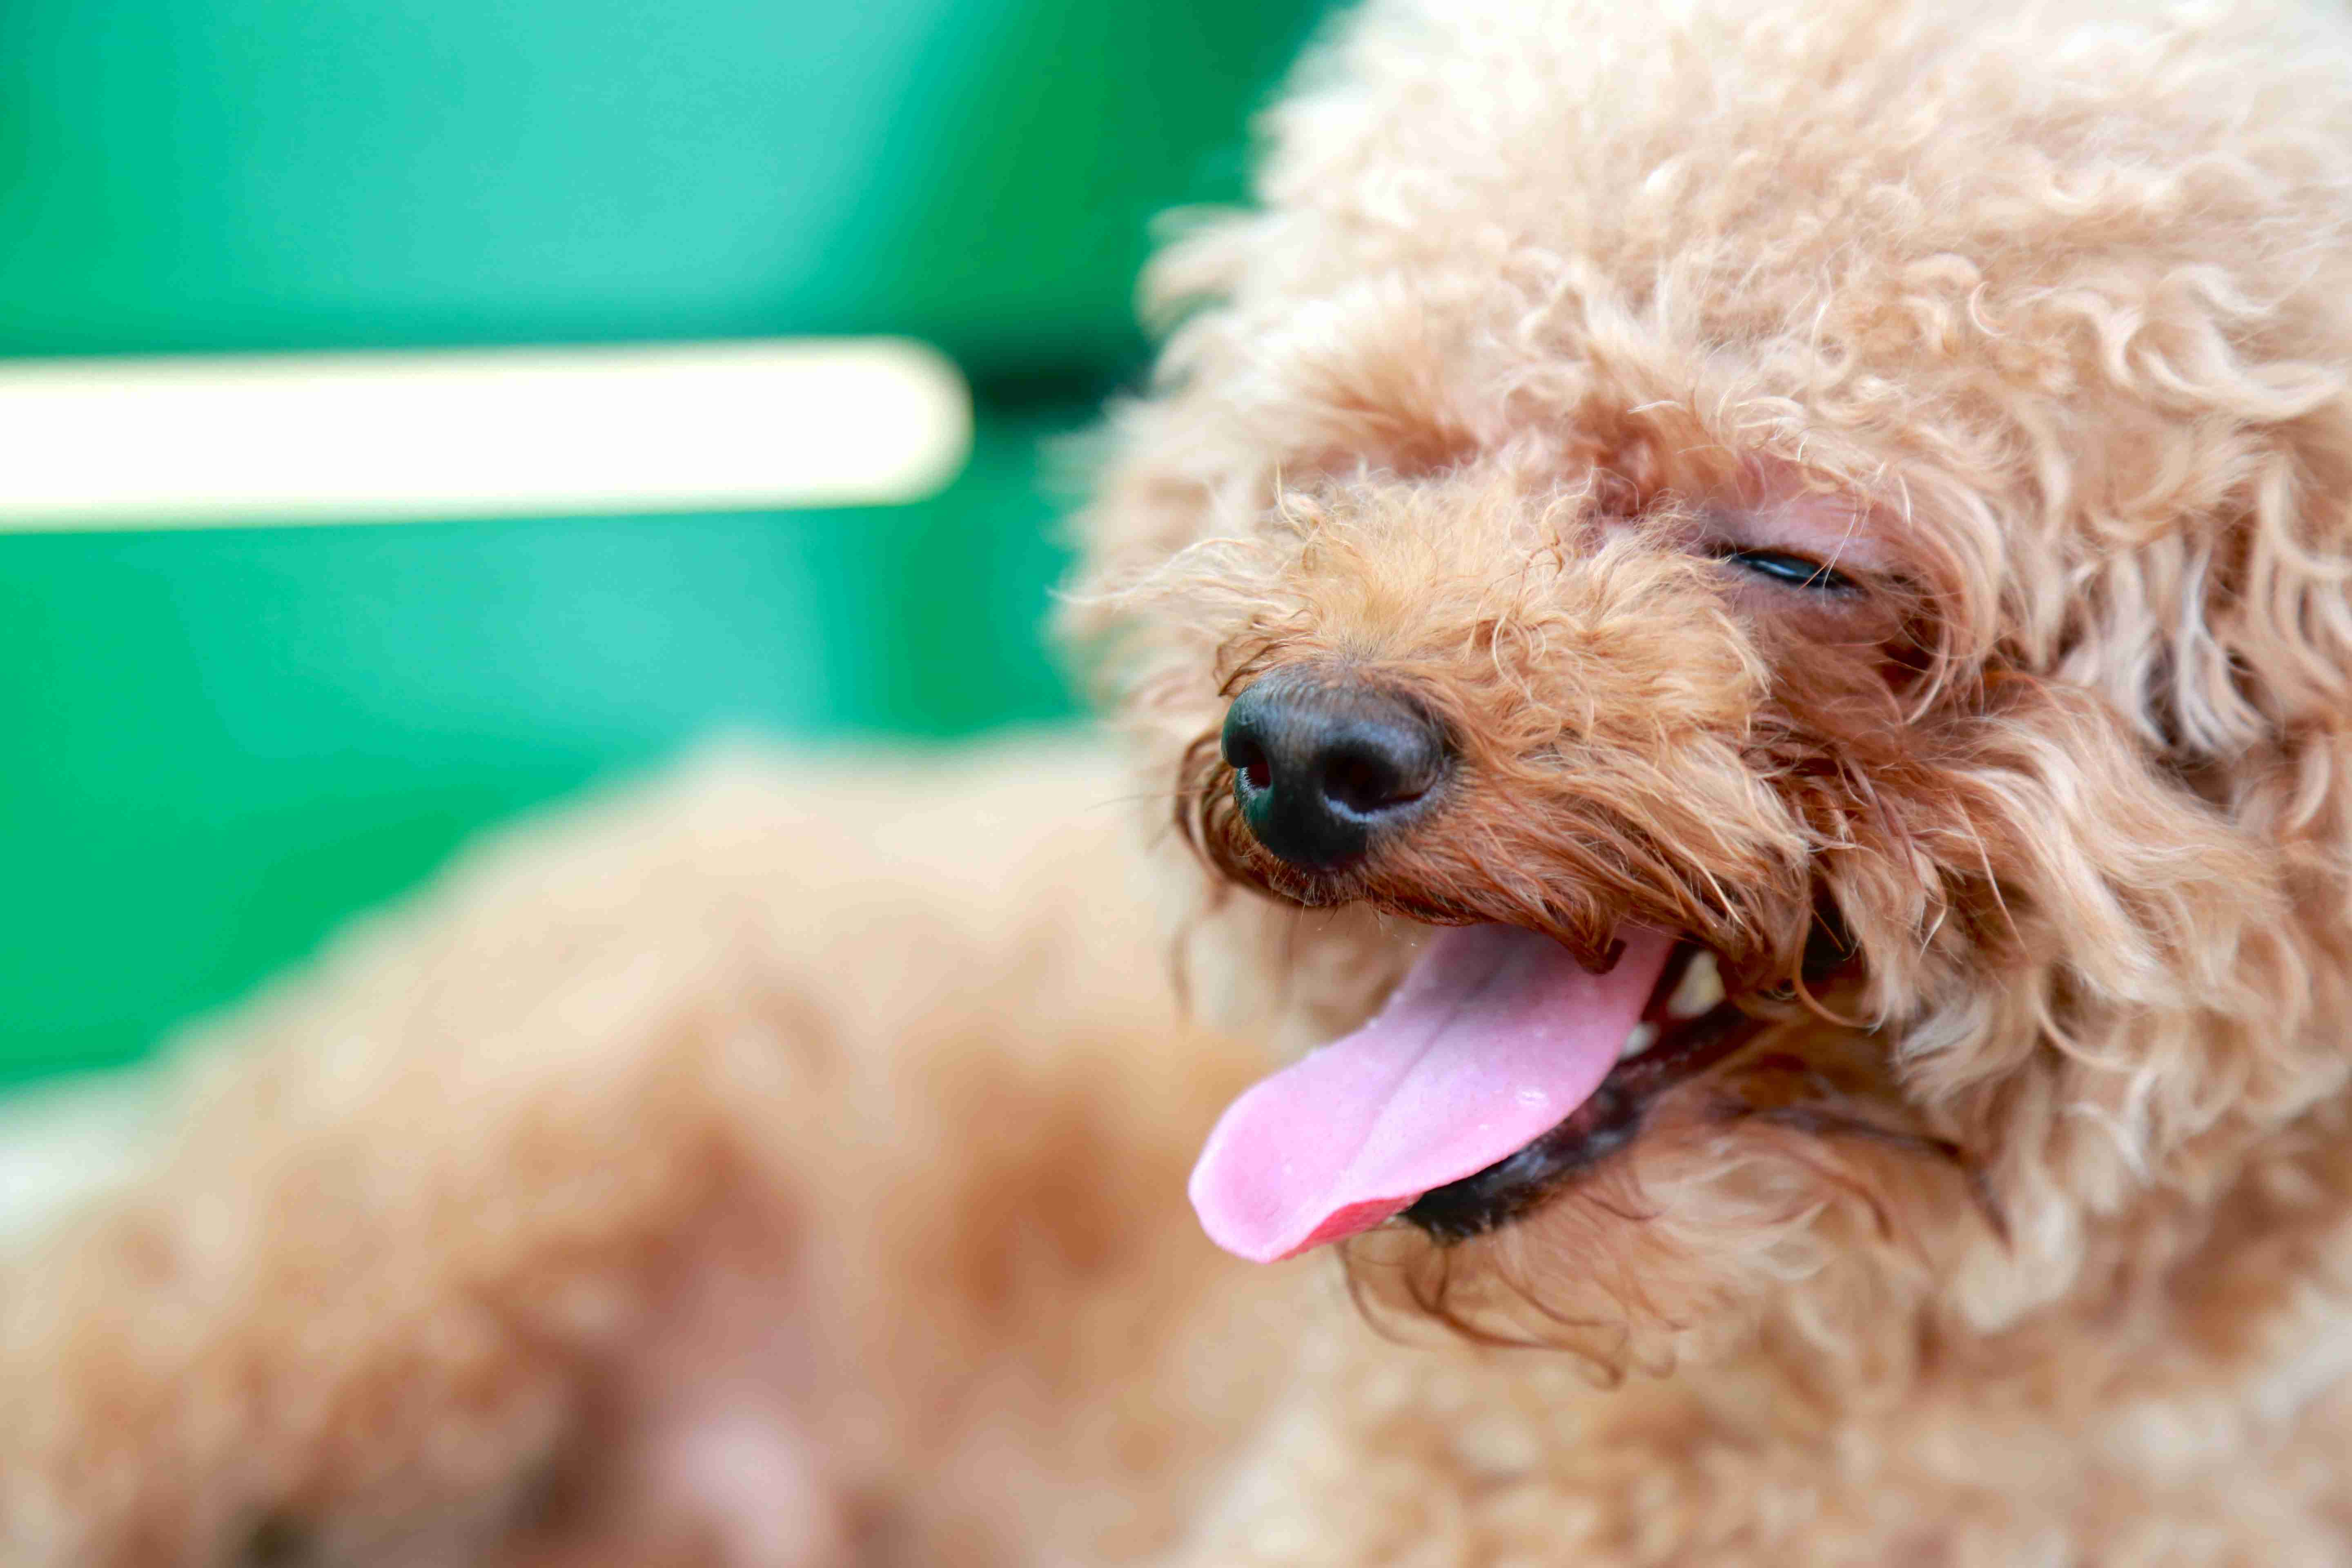 Are Poodles prone to developing autoimmune skin disorders? What treatment options exist?